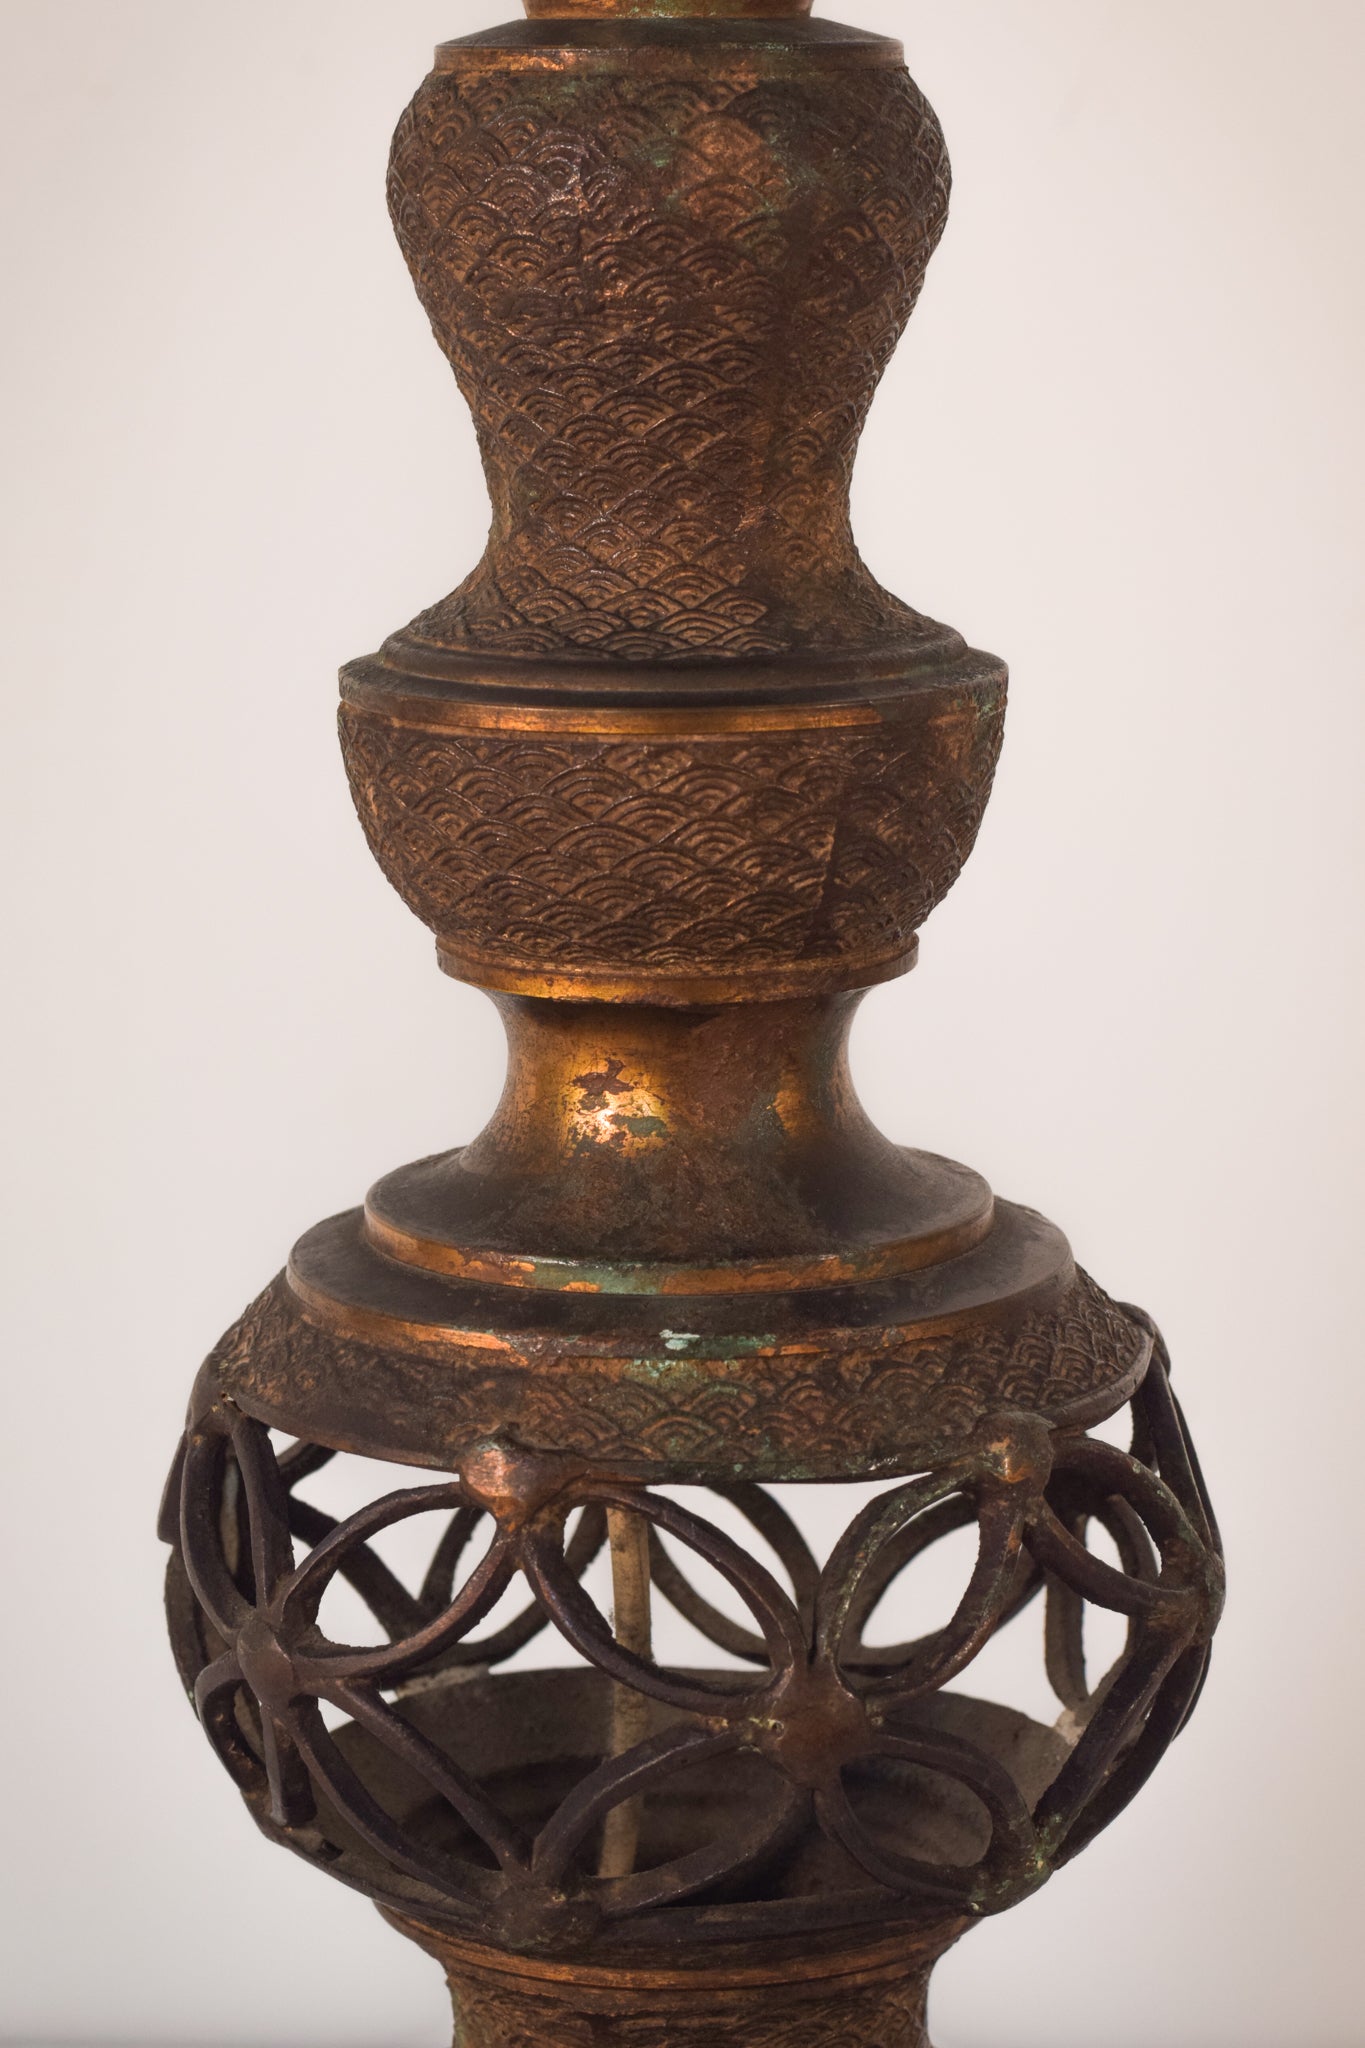 Oriental Style Patinated Brass Lamp Stand